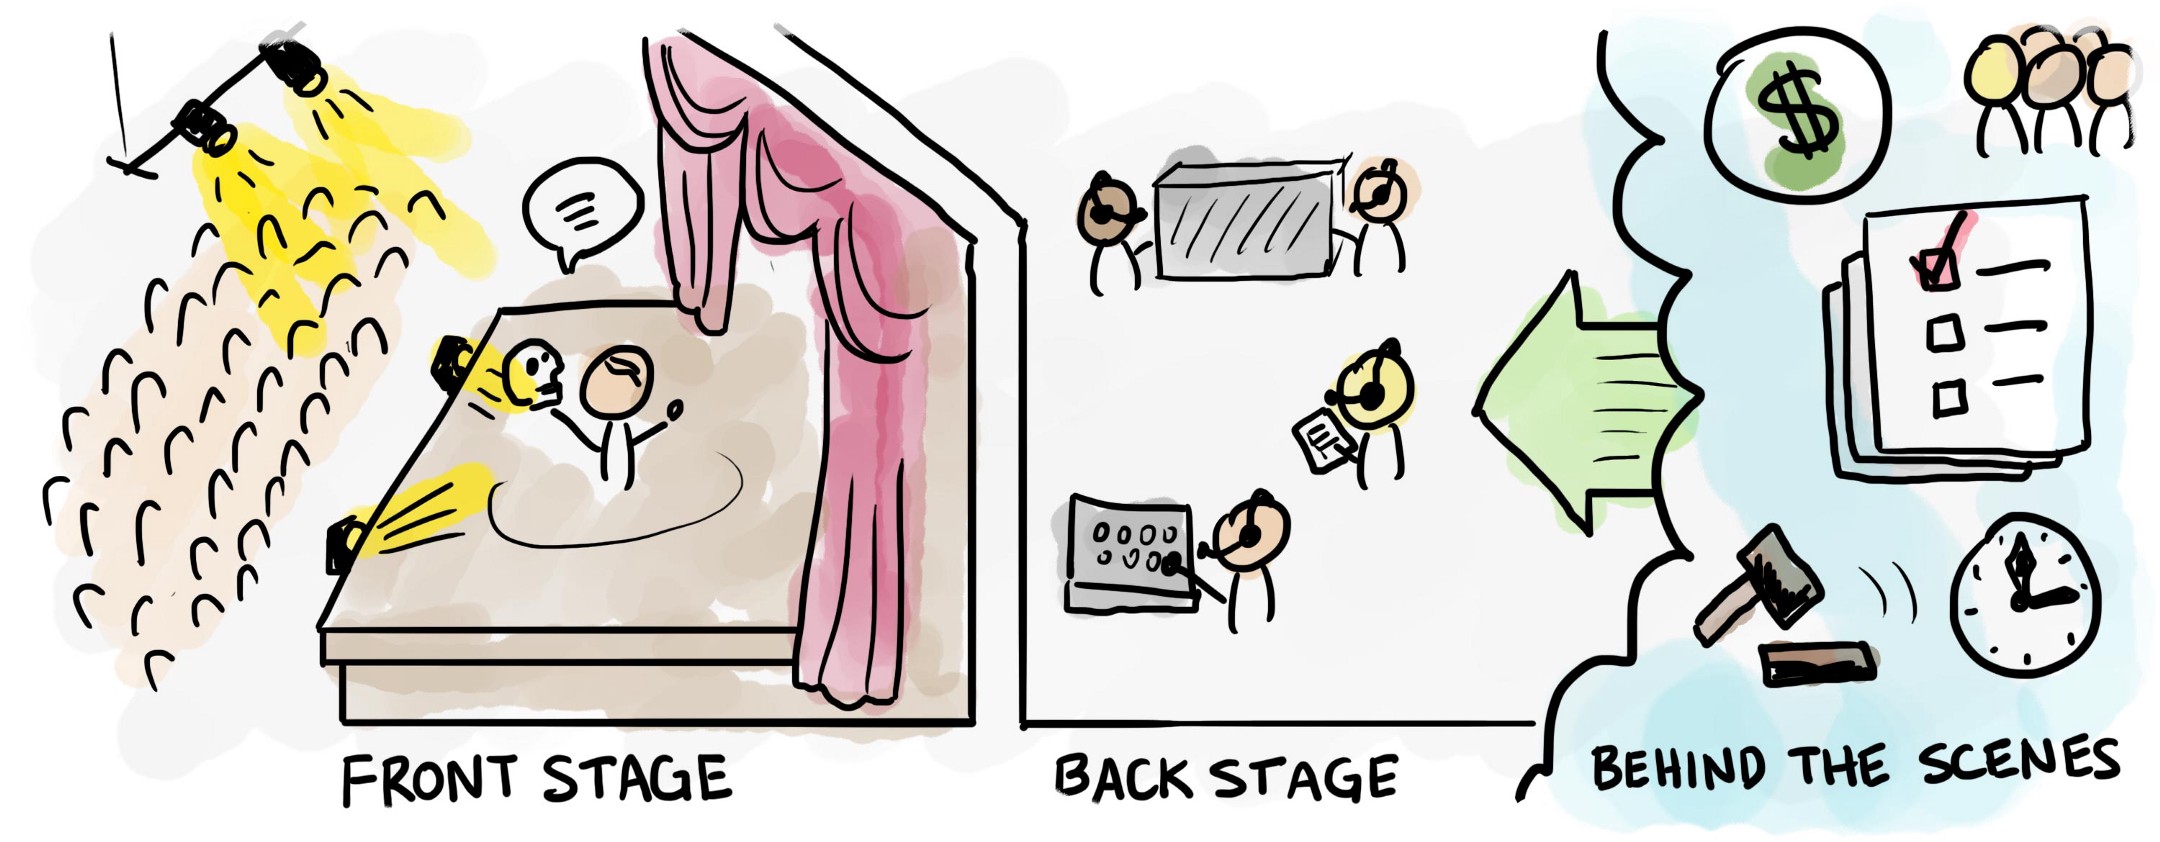 Image showcasing front stage and back stage at a theatre production